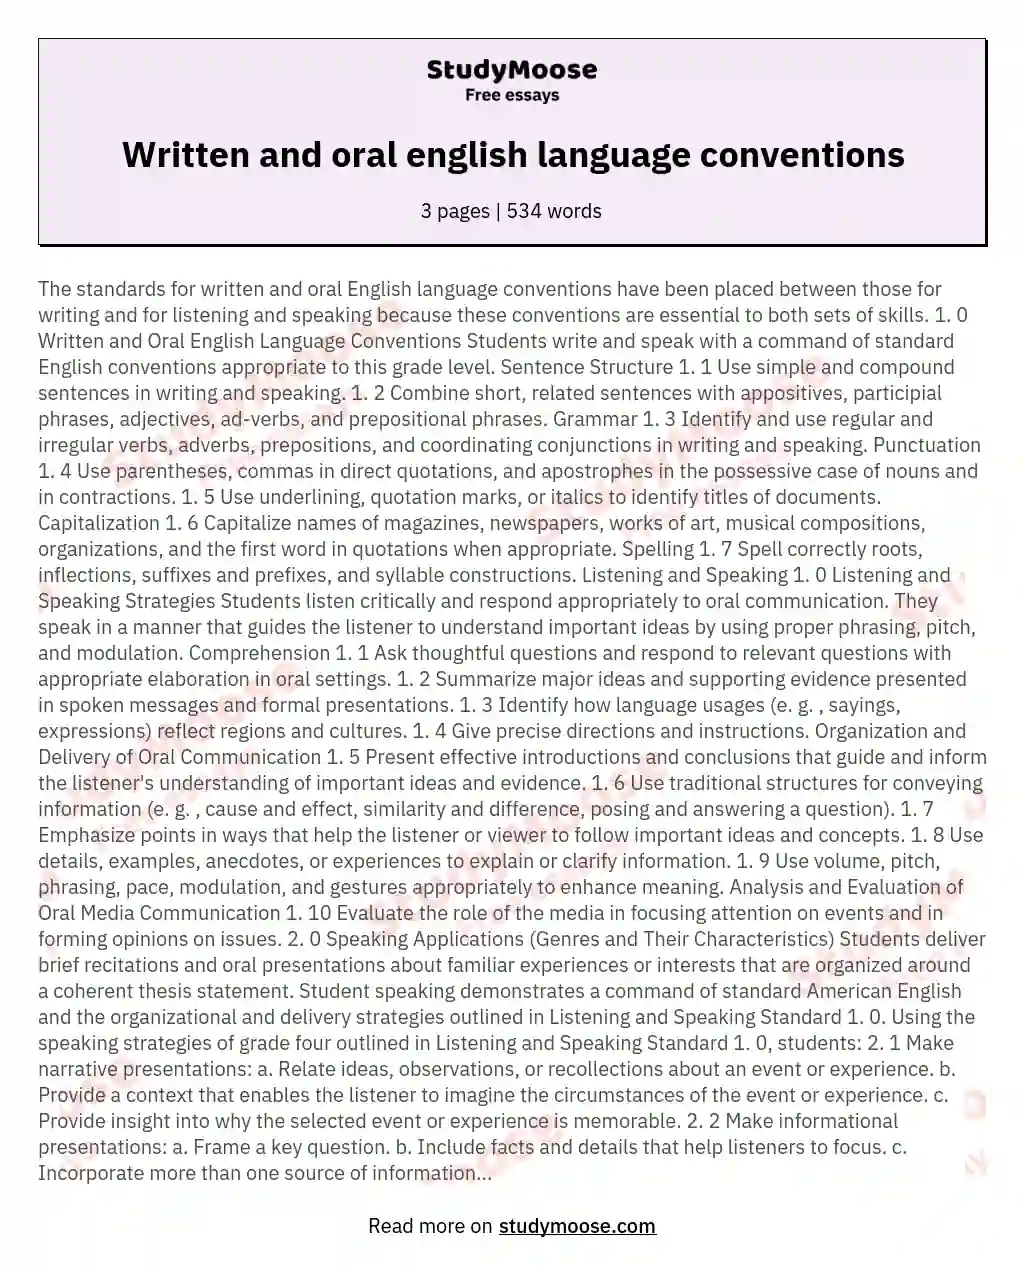 Written and oral english language conventions essay